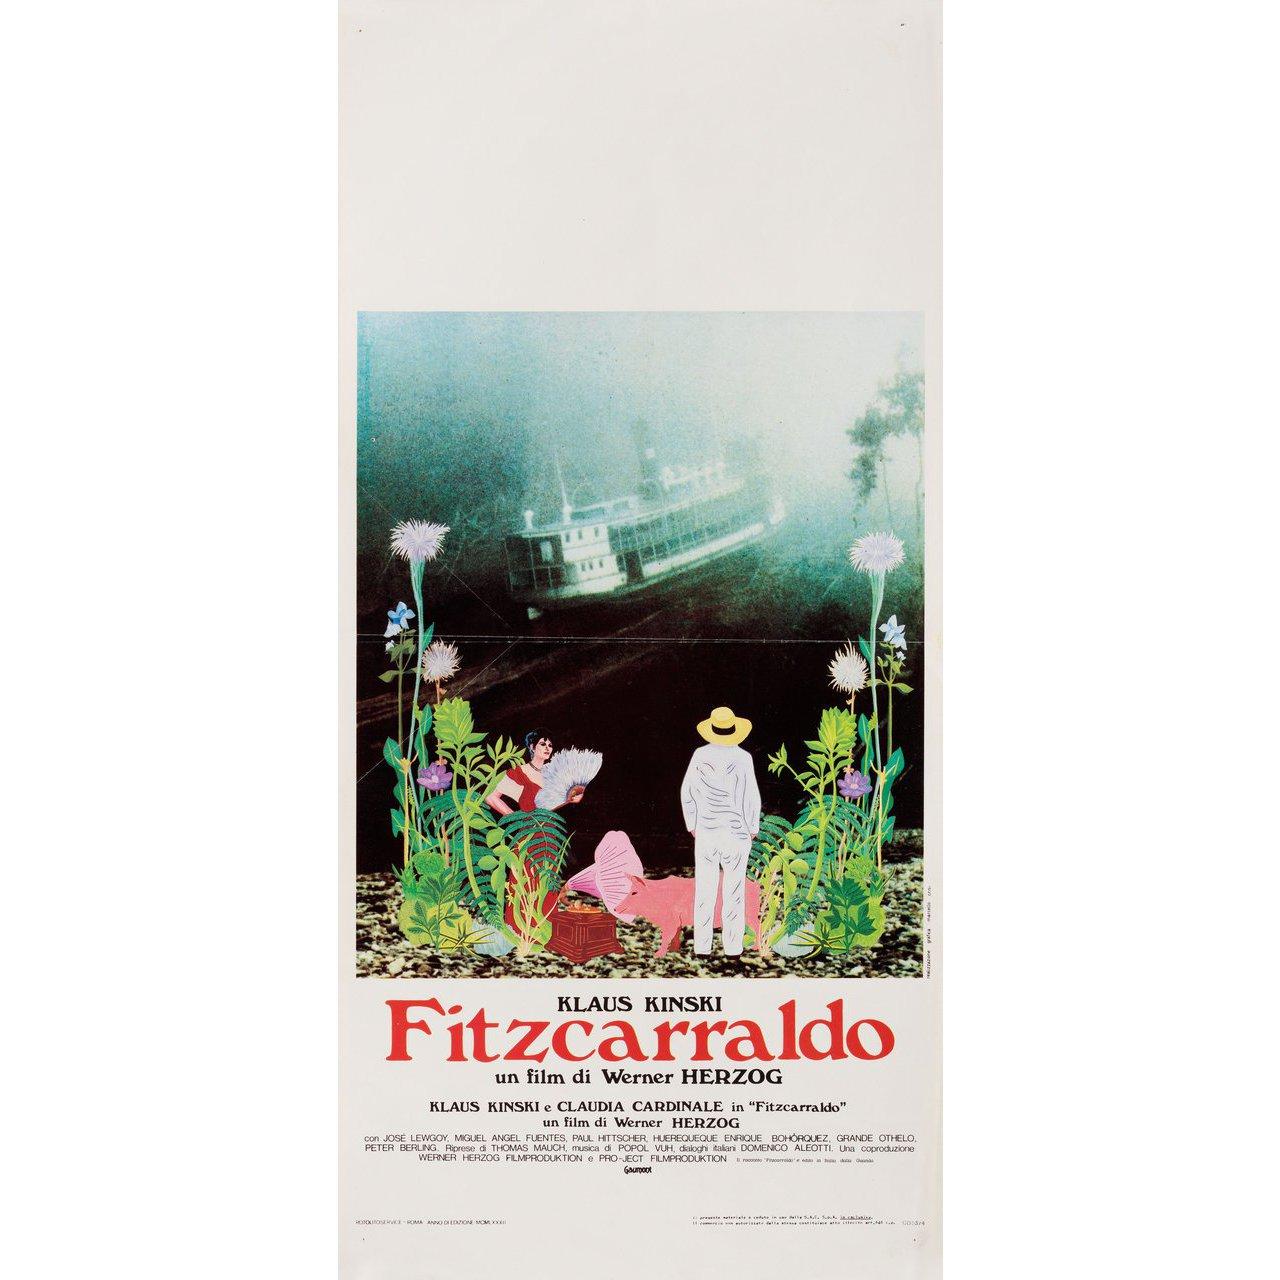 Original 1982 Italian locandina poster by Marcello Crisi for the film Fitzcarraldo directed by Werner Herzog with Klaus Kinski / Claudia Cardinale / Jose Lewgoy / Miguel Angel Fuentes. Very good-fine condition, folded with pinholes. Many original